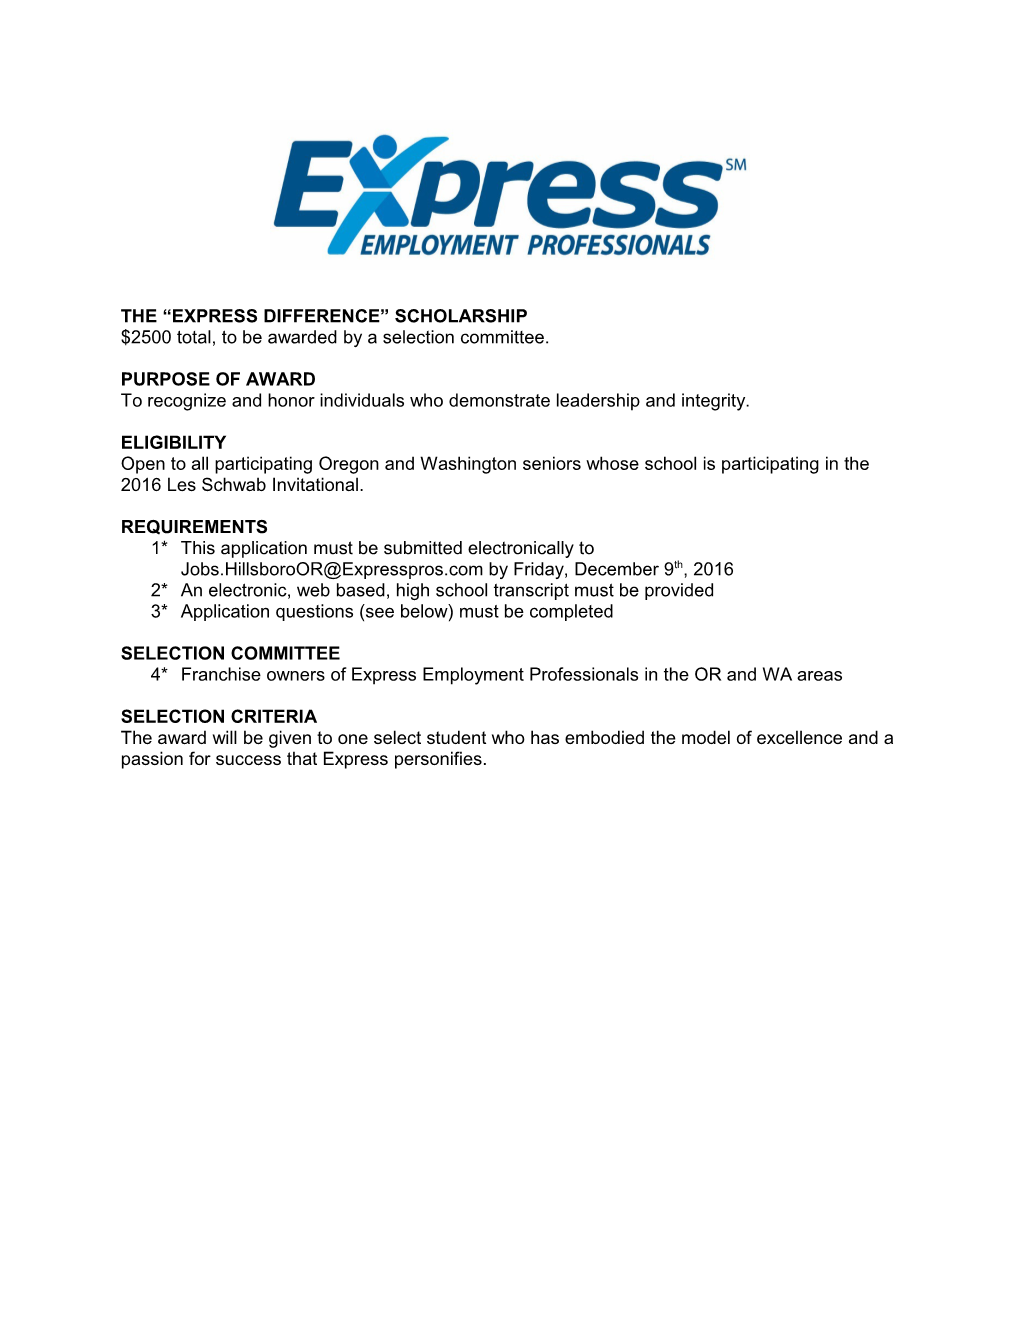 The Express Difference Scholarship